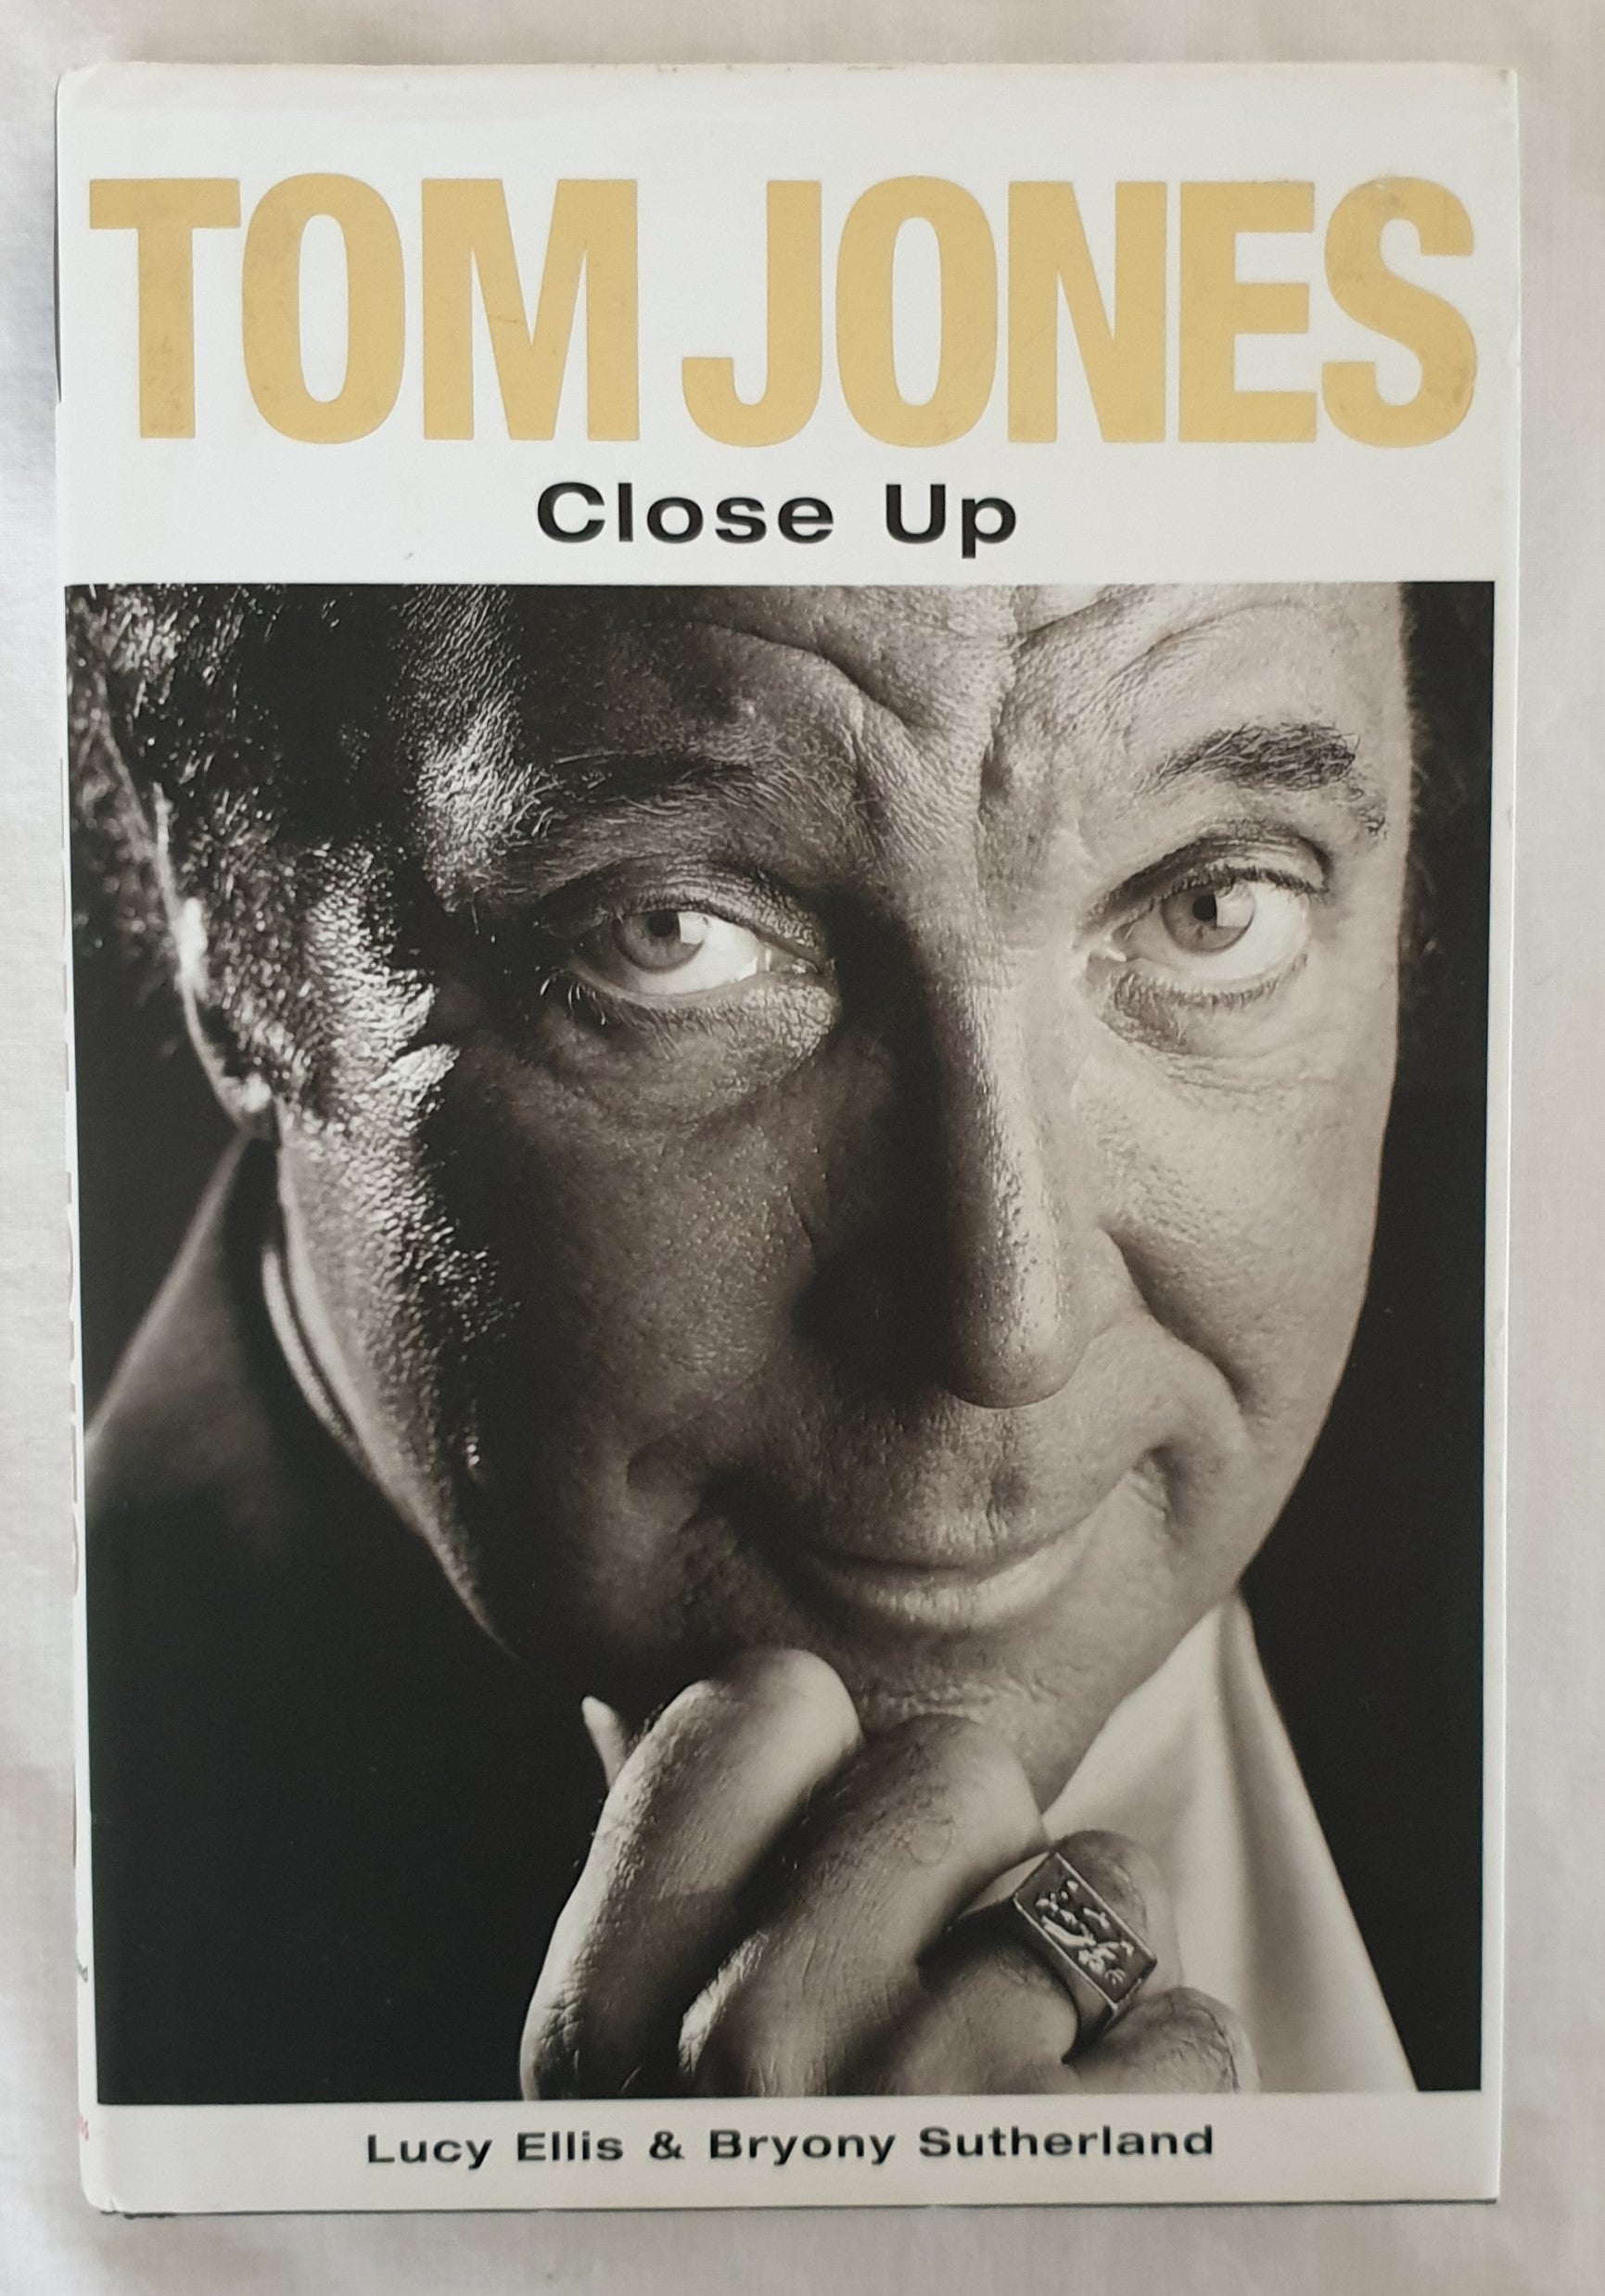 Tom Jones  Close Up  by Lucy Ellis & Bryony Sutherland